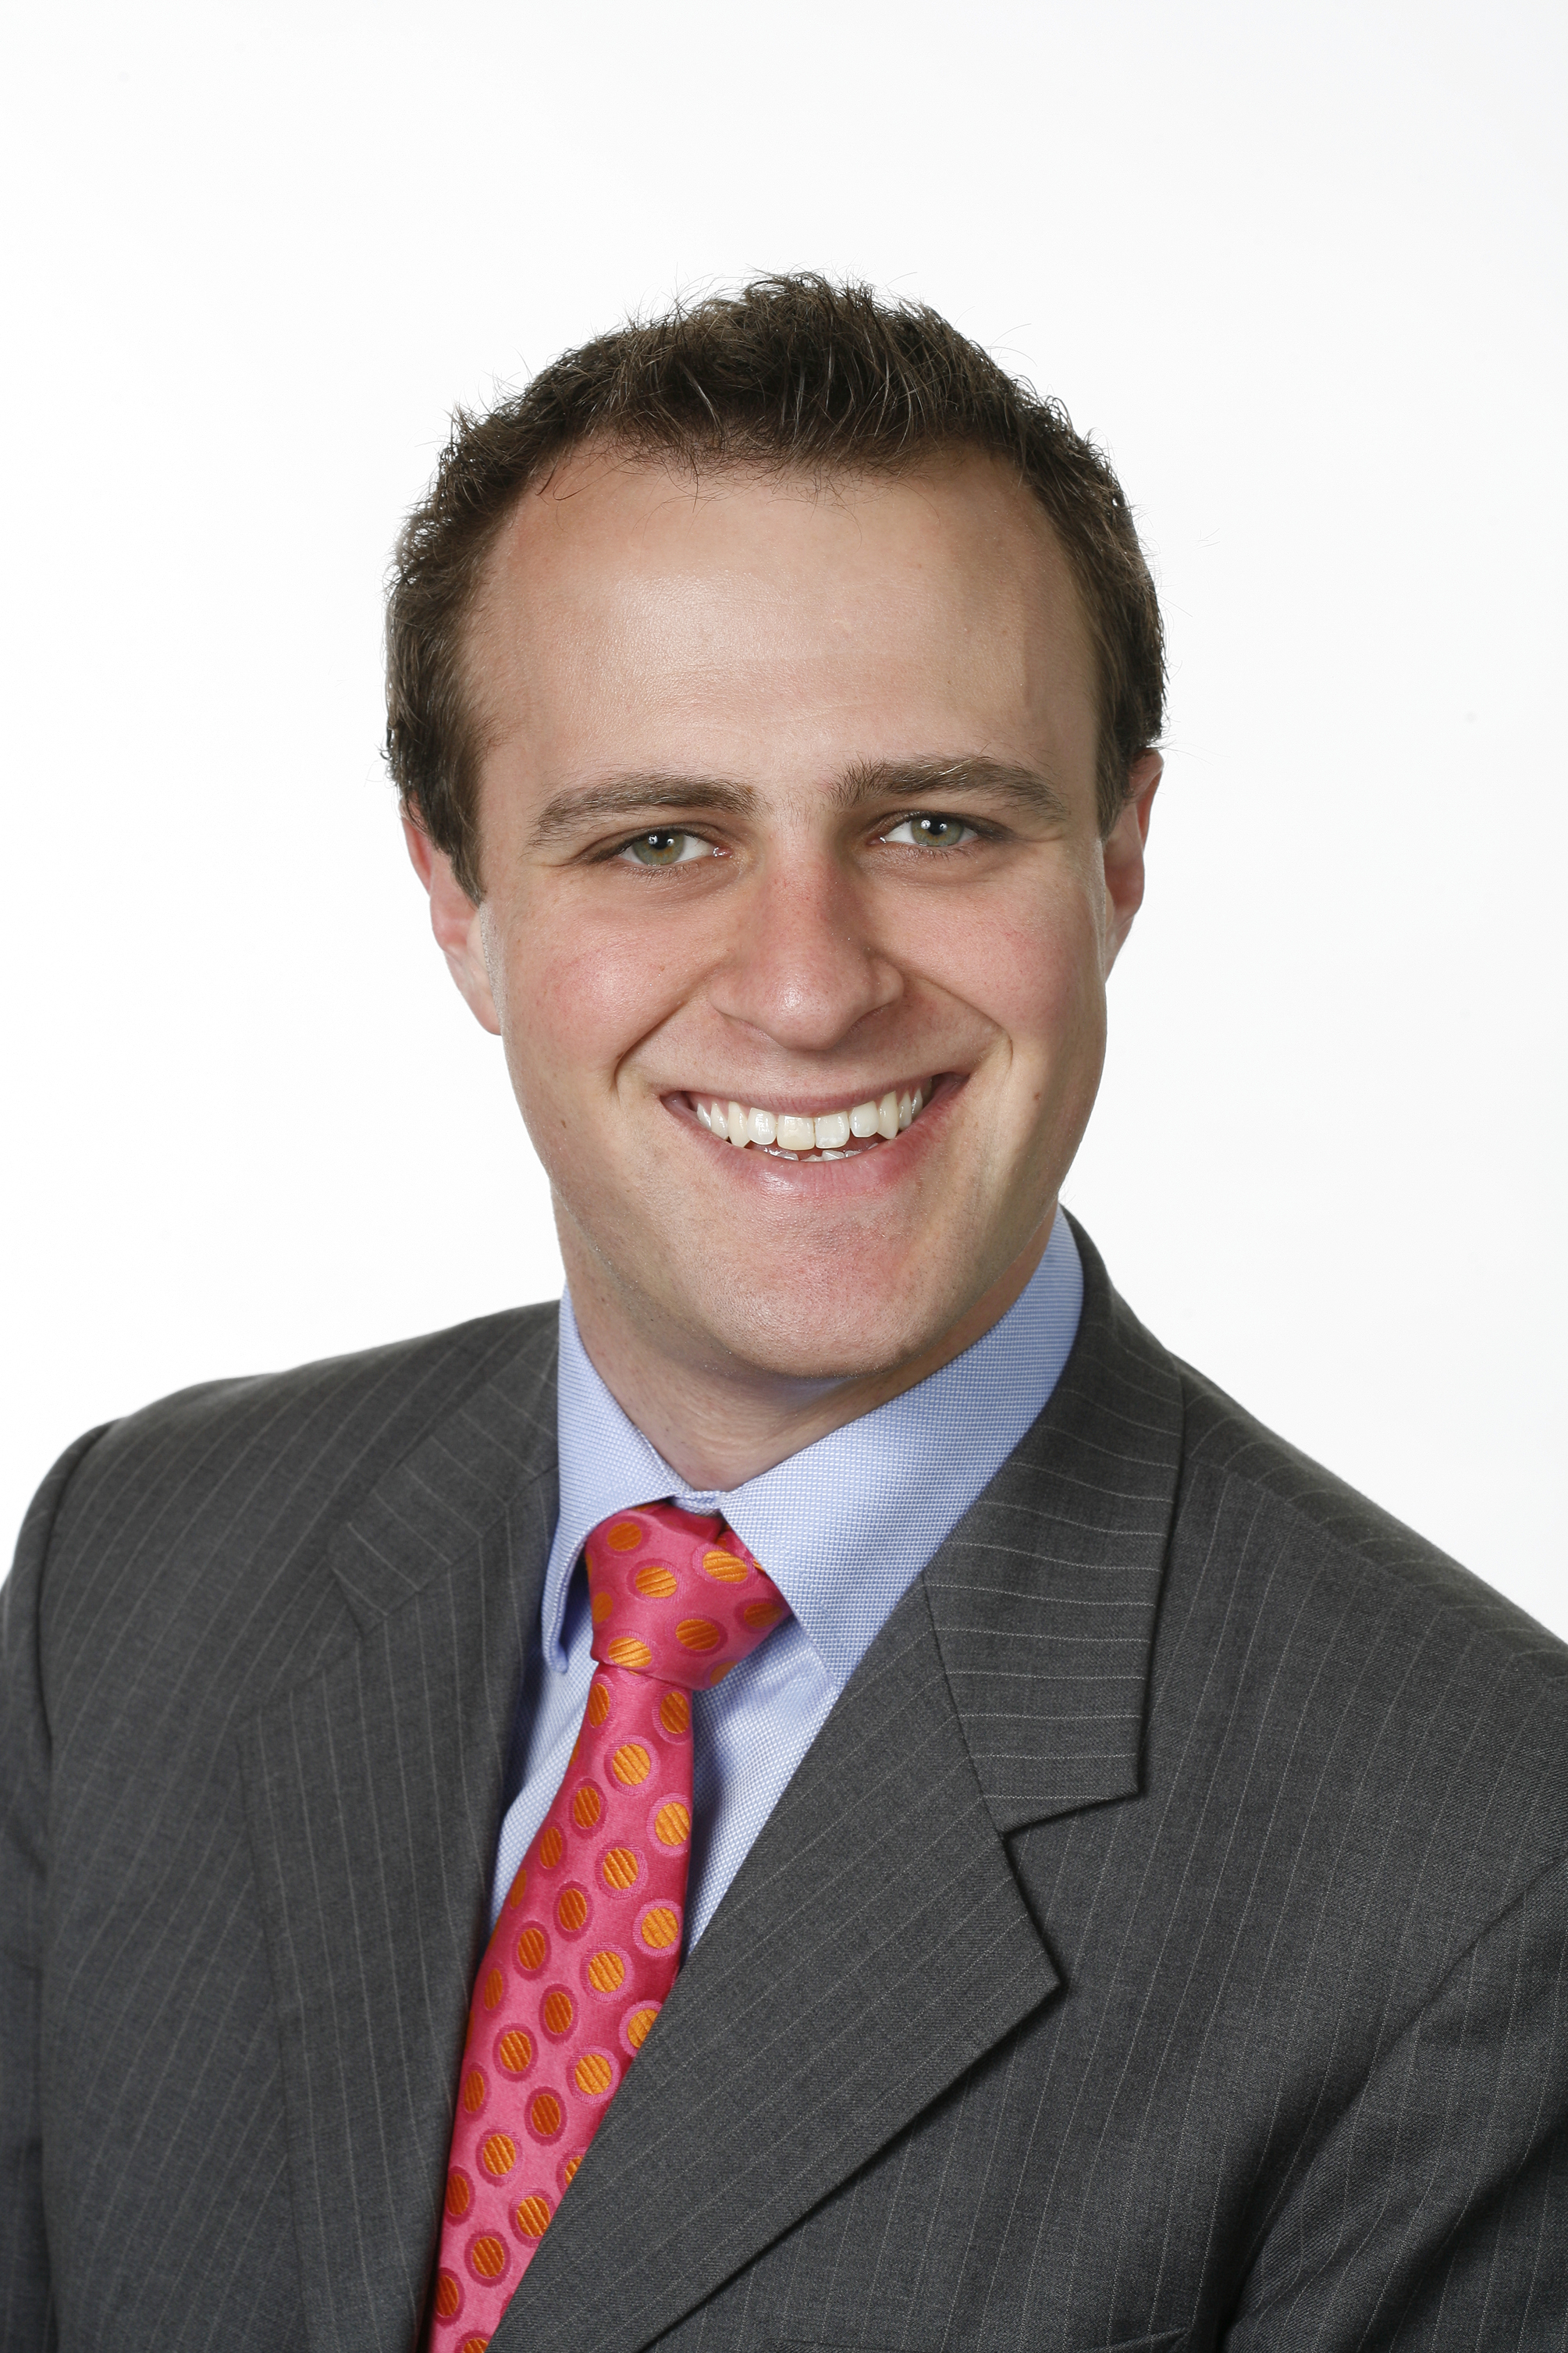 Australian Human Rights Commissioner, Tim Wilson, will be among the speakers at the G20 Interfaith Summit.